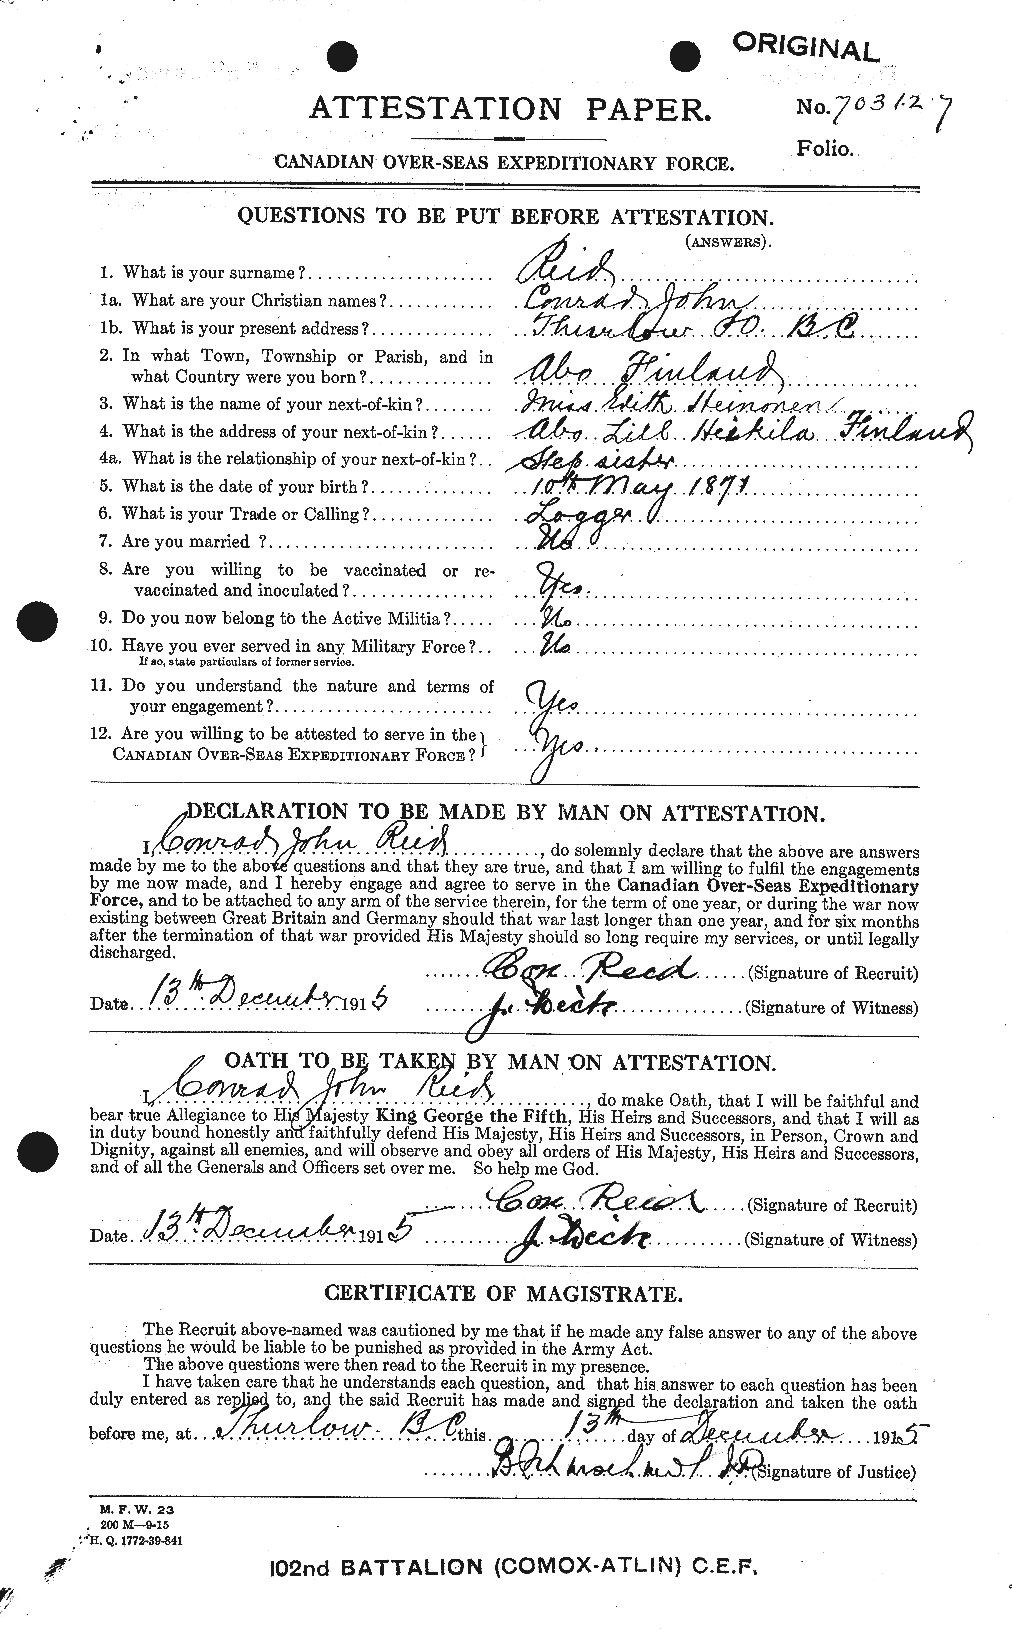 Personnel Records of the First World War - CEF 597914a